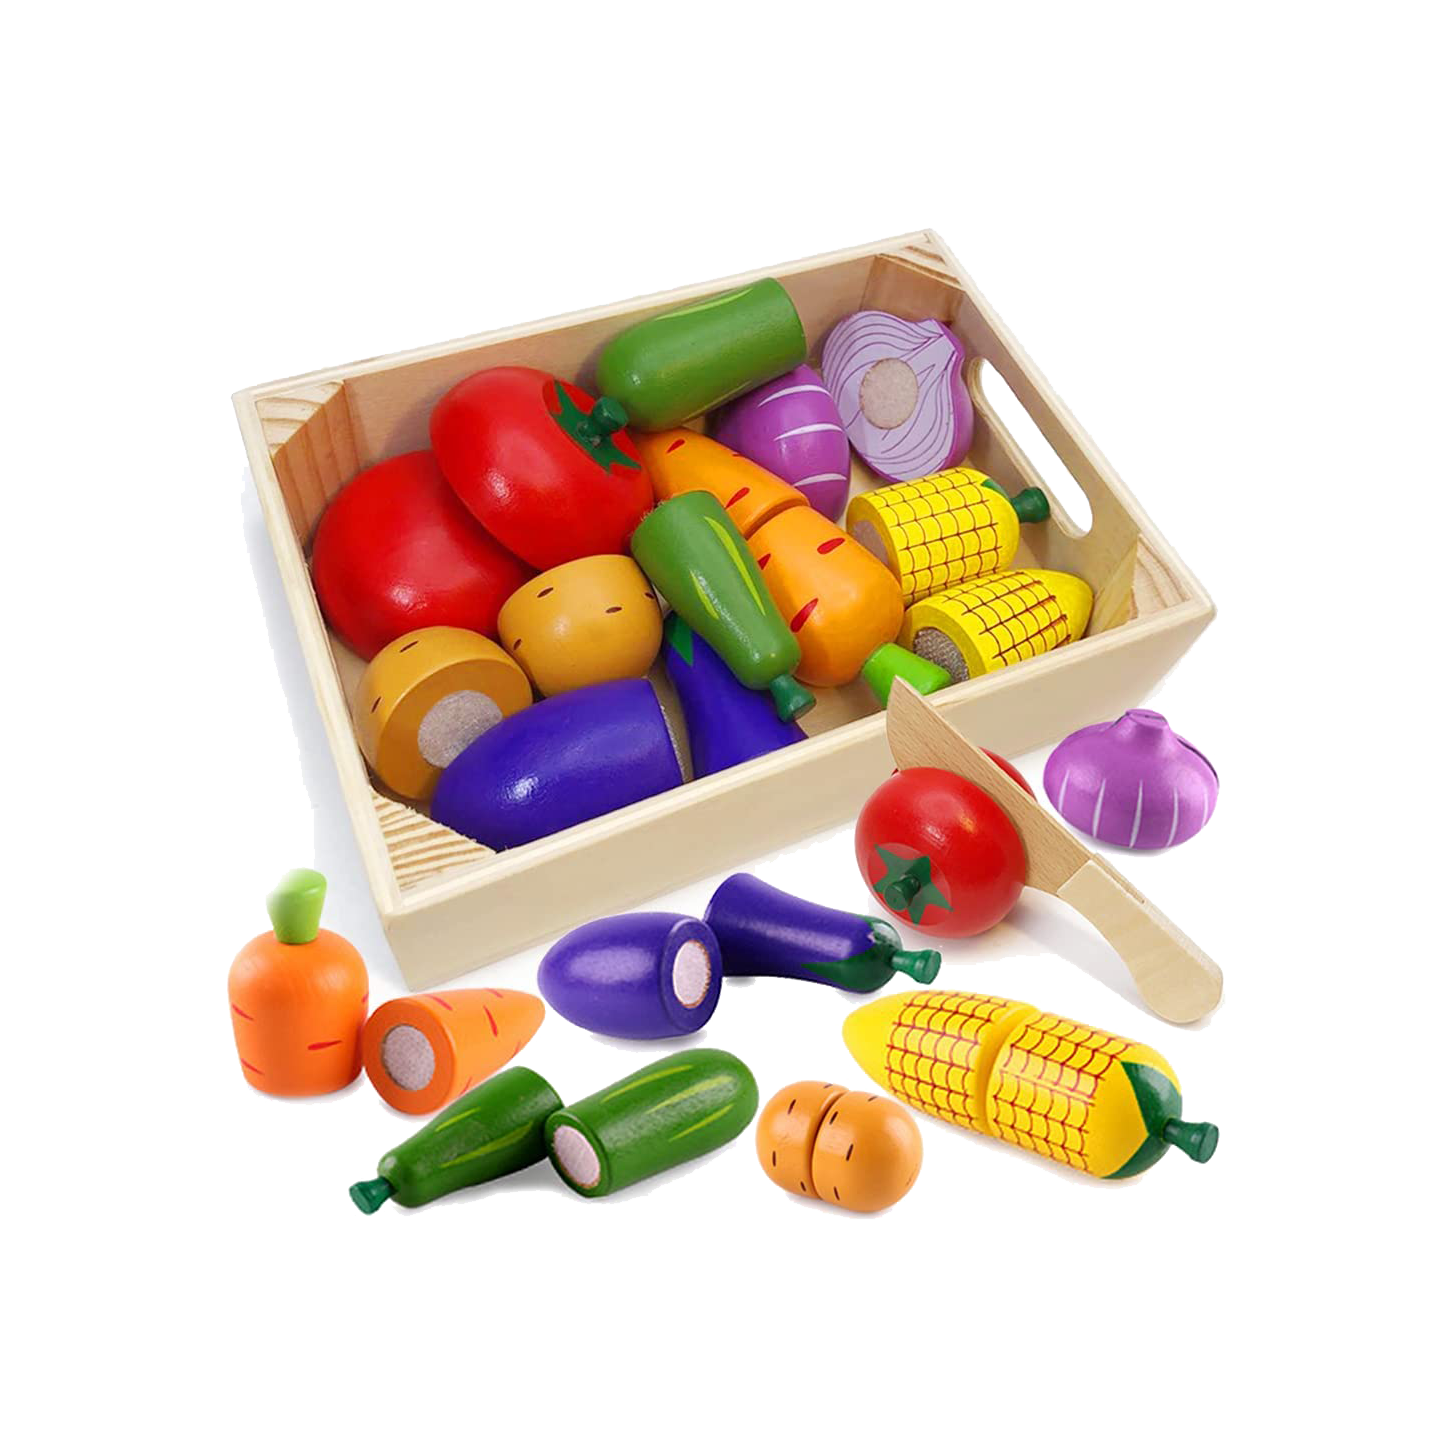 Wooden Play Food Toy Set